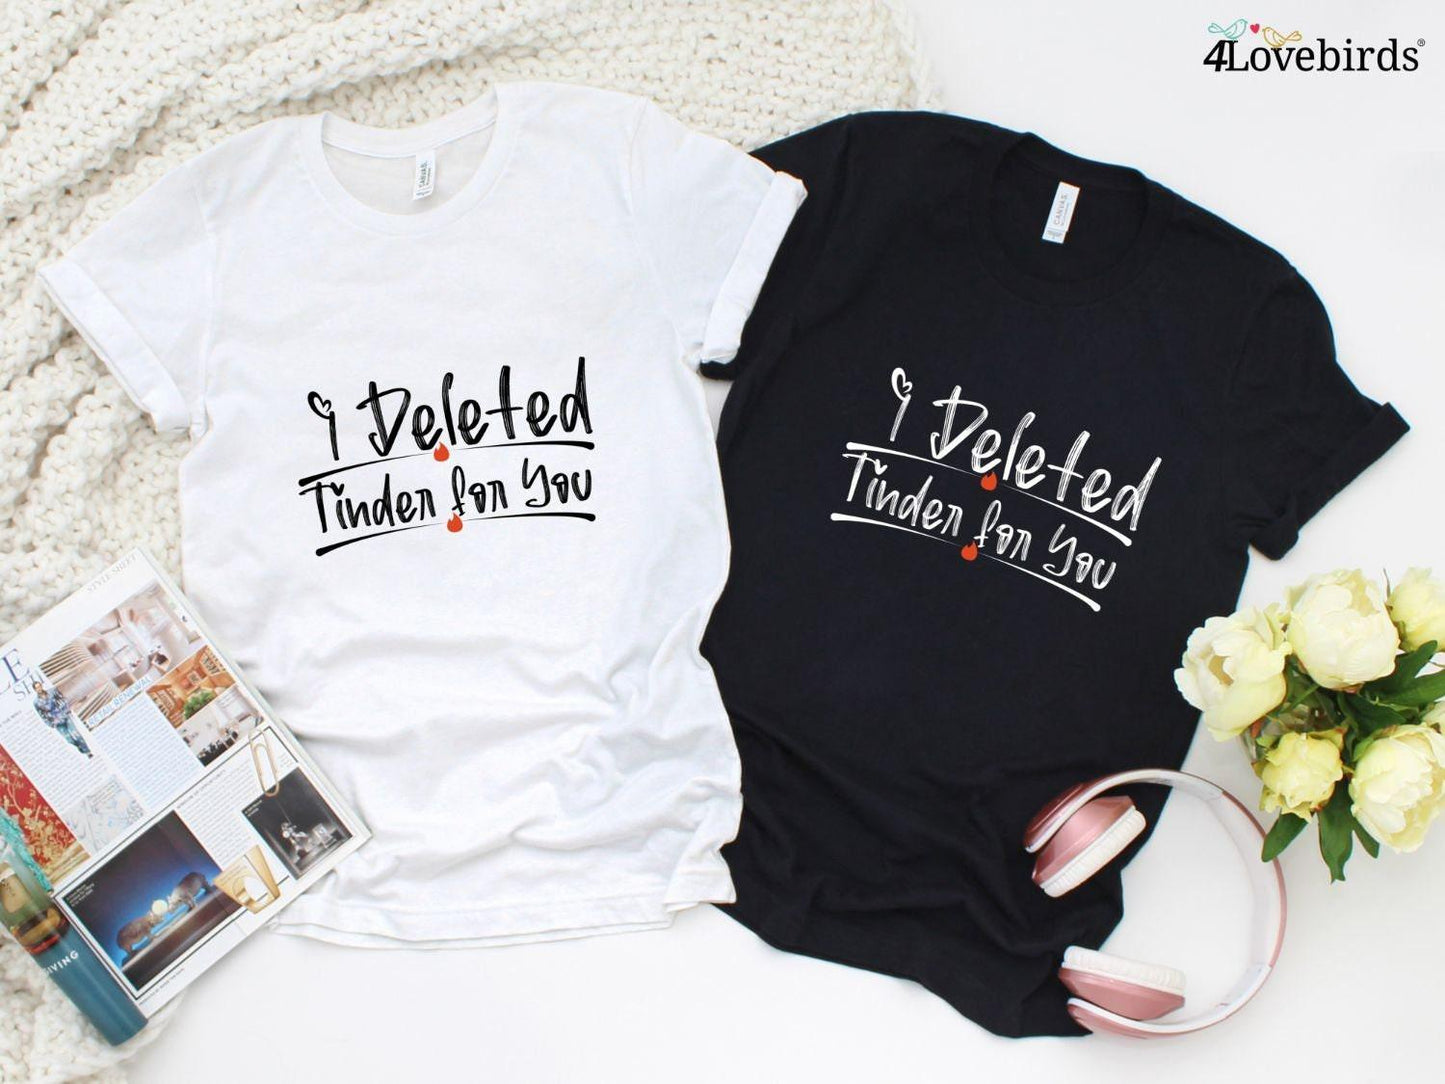 I Deleted Tinder for You | Short-Sleeve Unisex T-Shirt | Tinder Couple Hoodie for Anniversary - 4Lovebirds